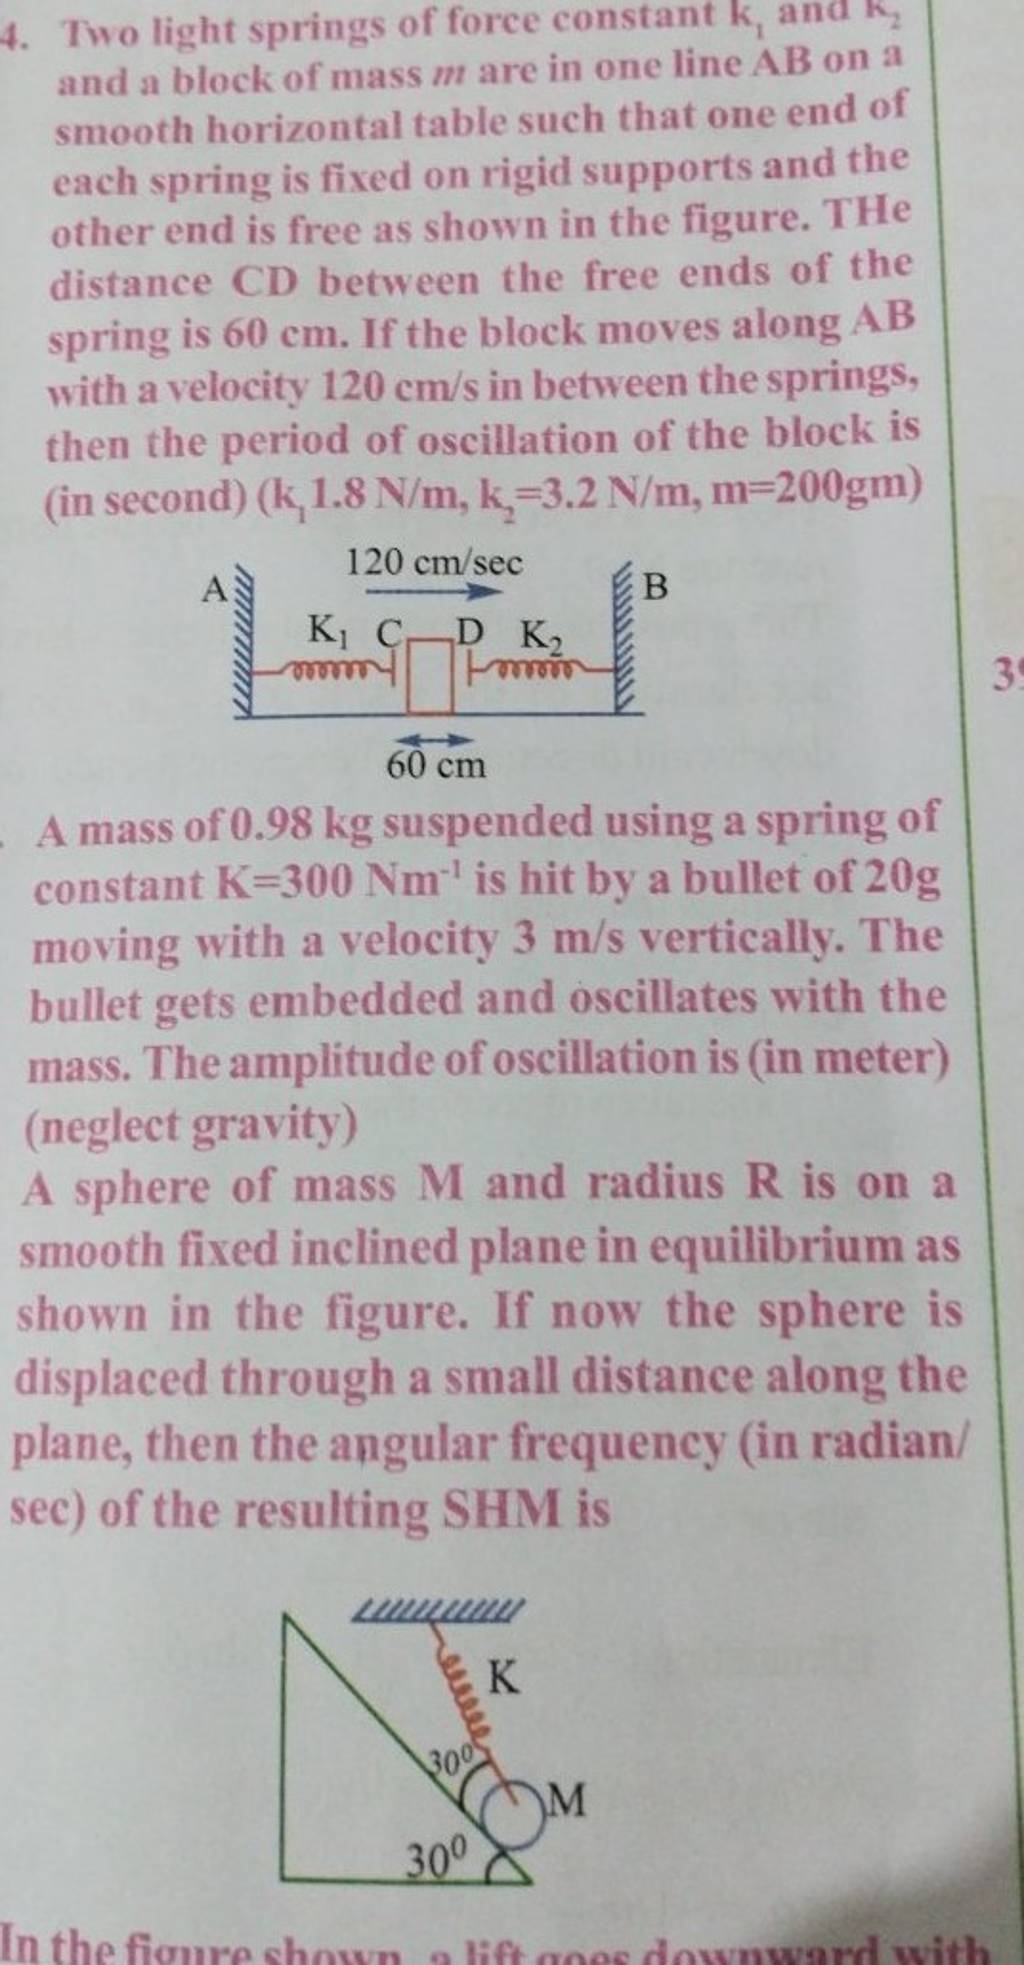 4. Two light springs of force constant k1​ and k2​ and a block of mass